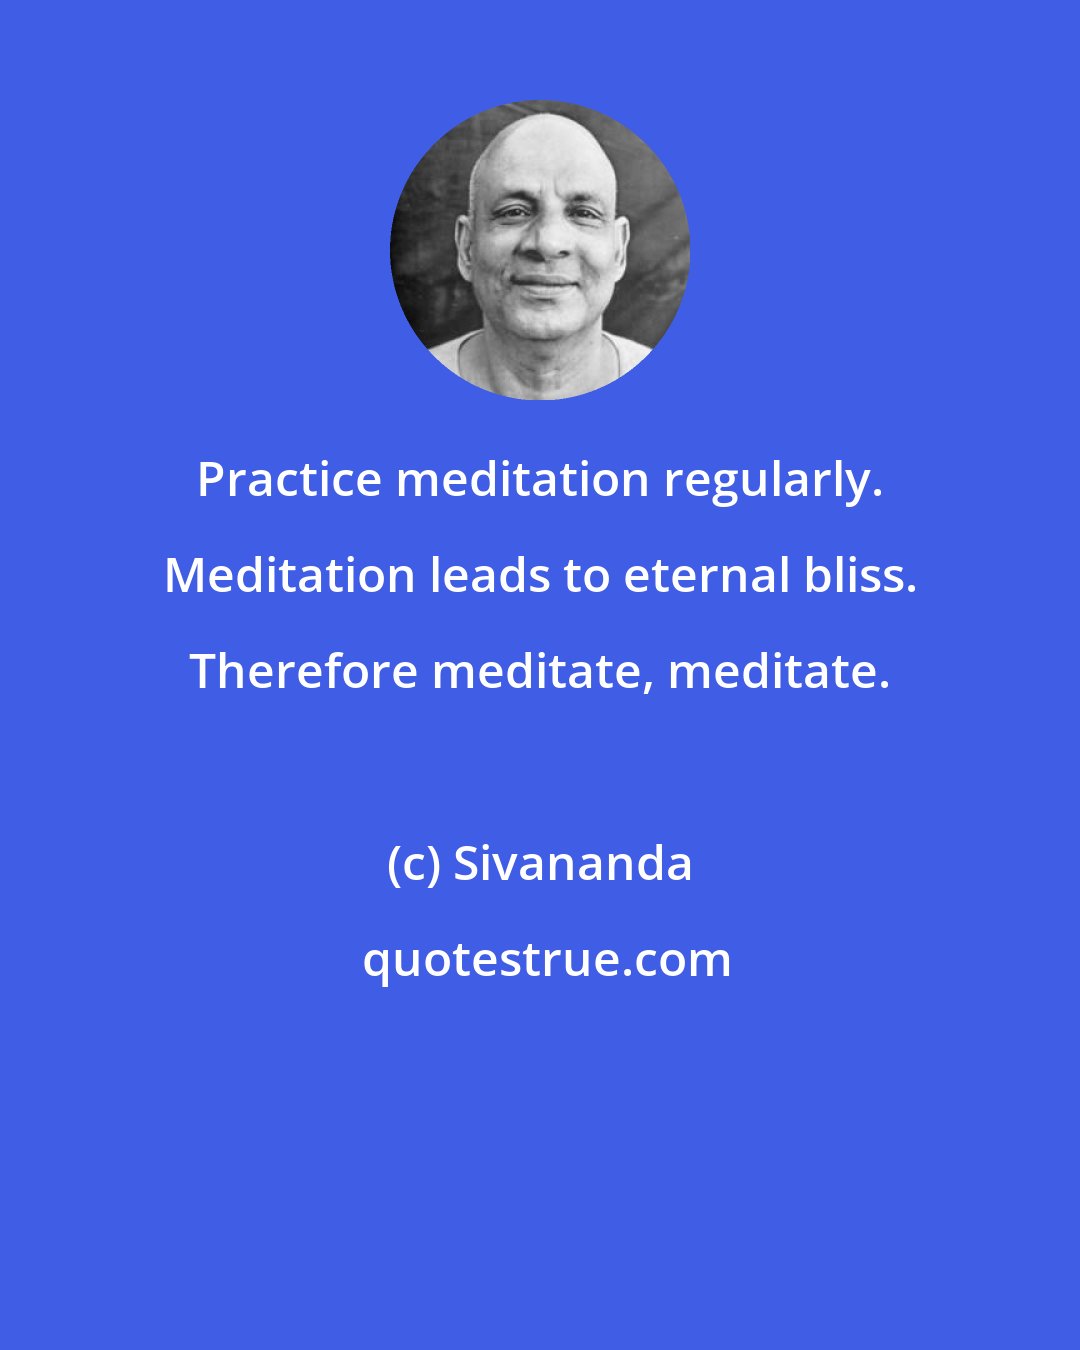 Sivananda: Practice meditation regularly. Meditation leads to eternal bliss. Therefore meditate, meditate.